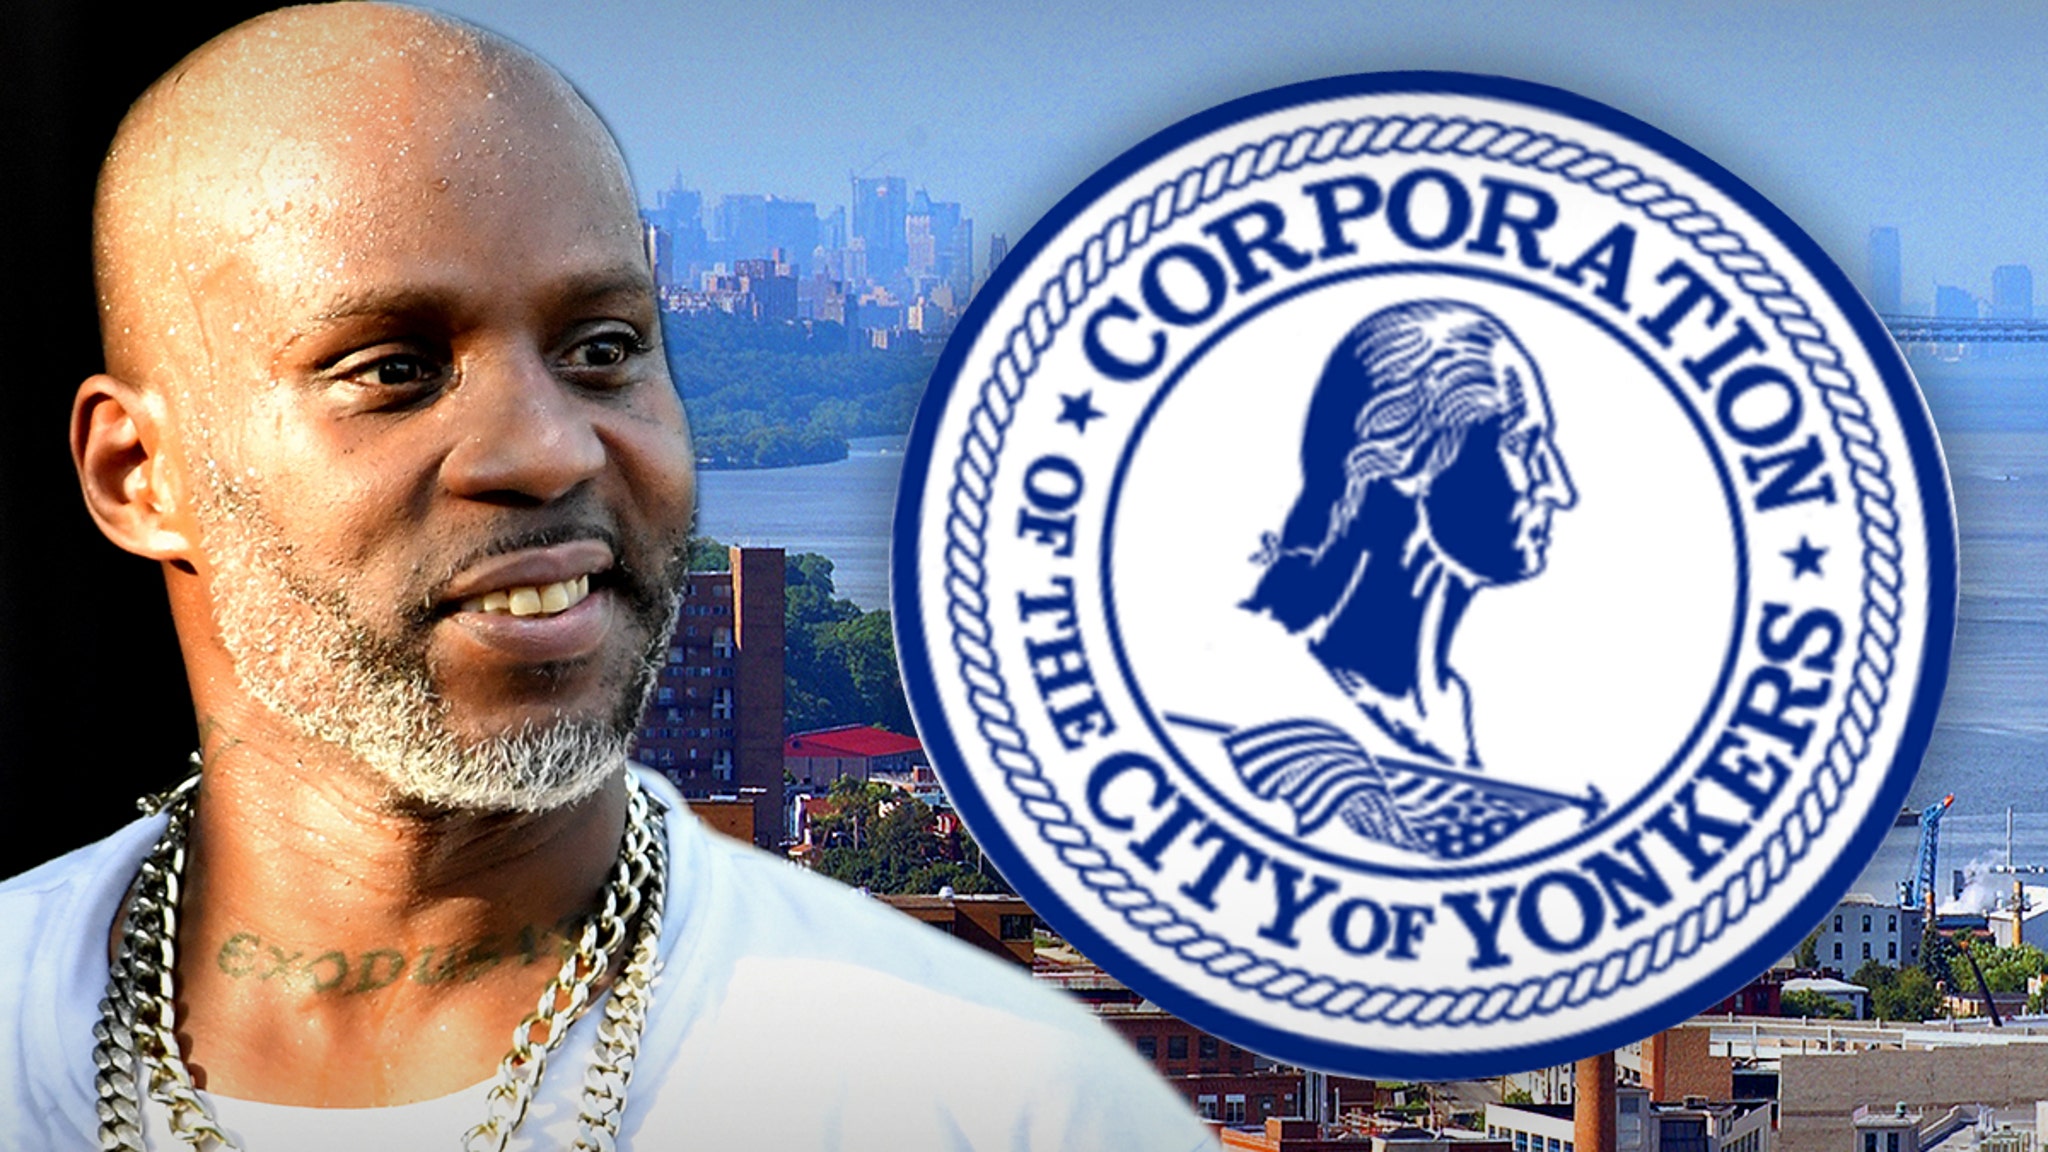 DMX to be honored in Township introduces Yonkers Mayor to racetrack